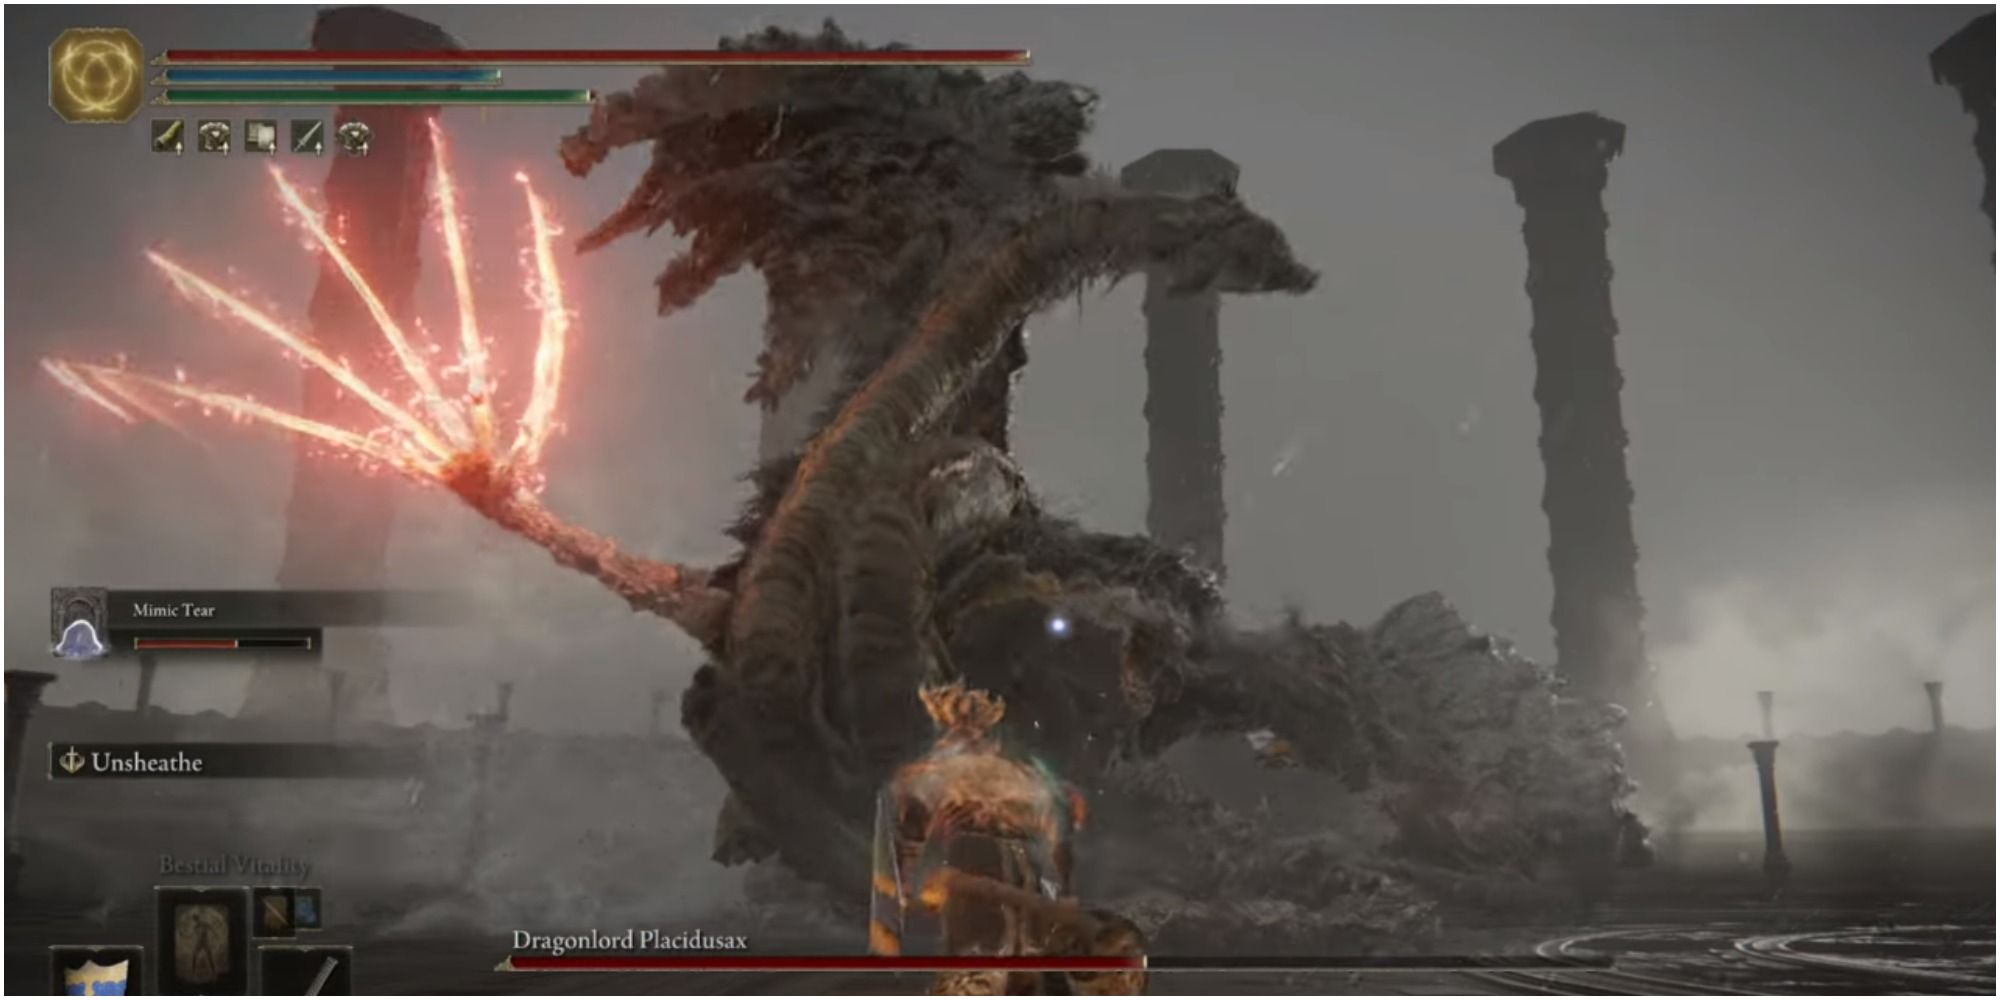 The boss about to strike the player with Lightning Claw.